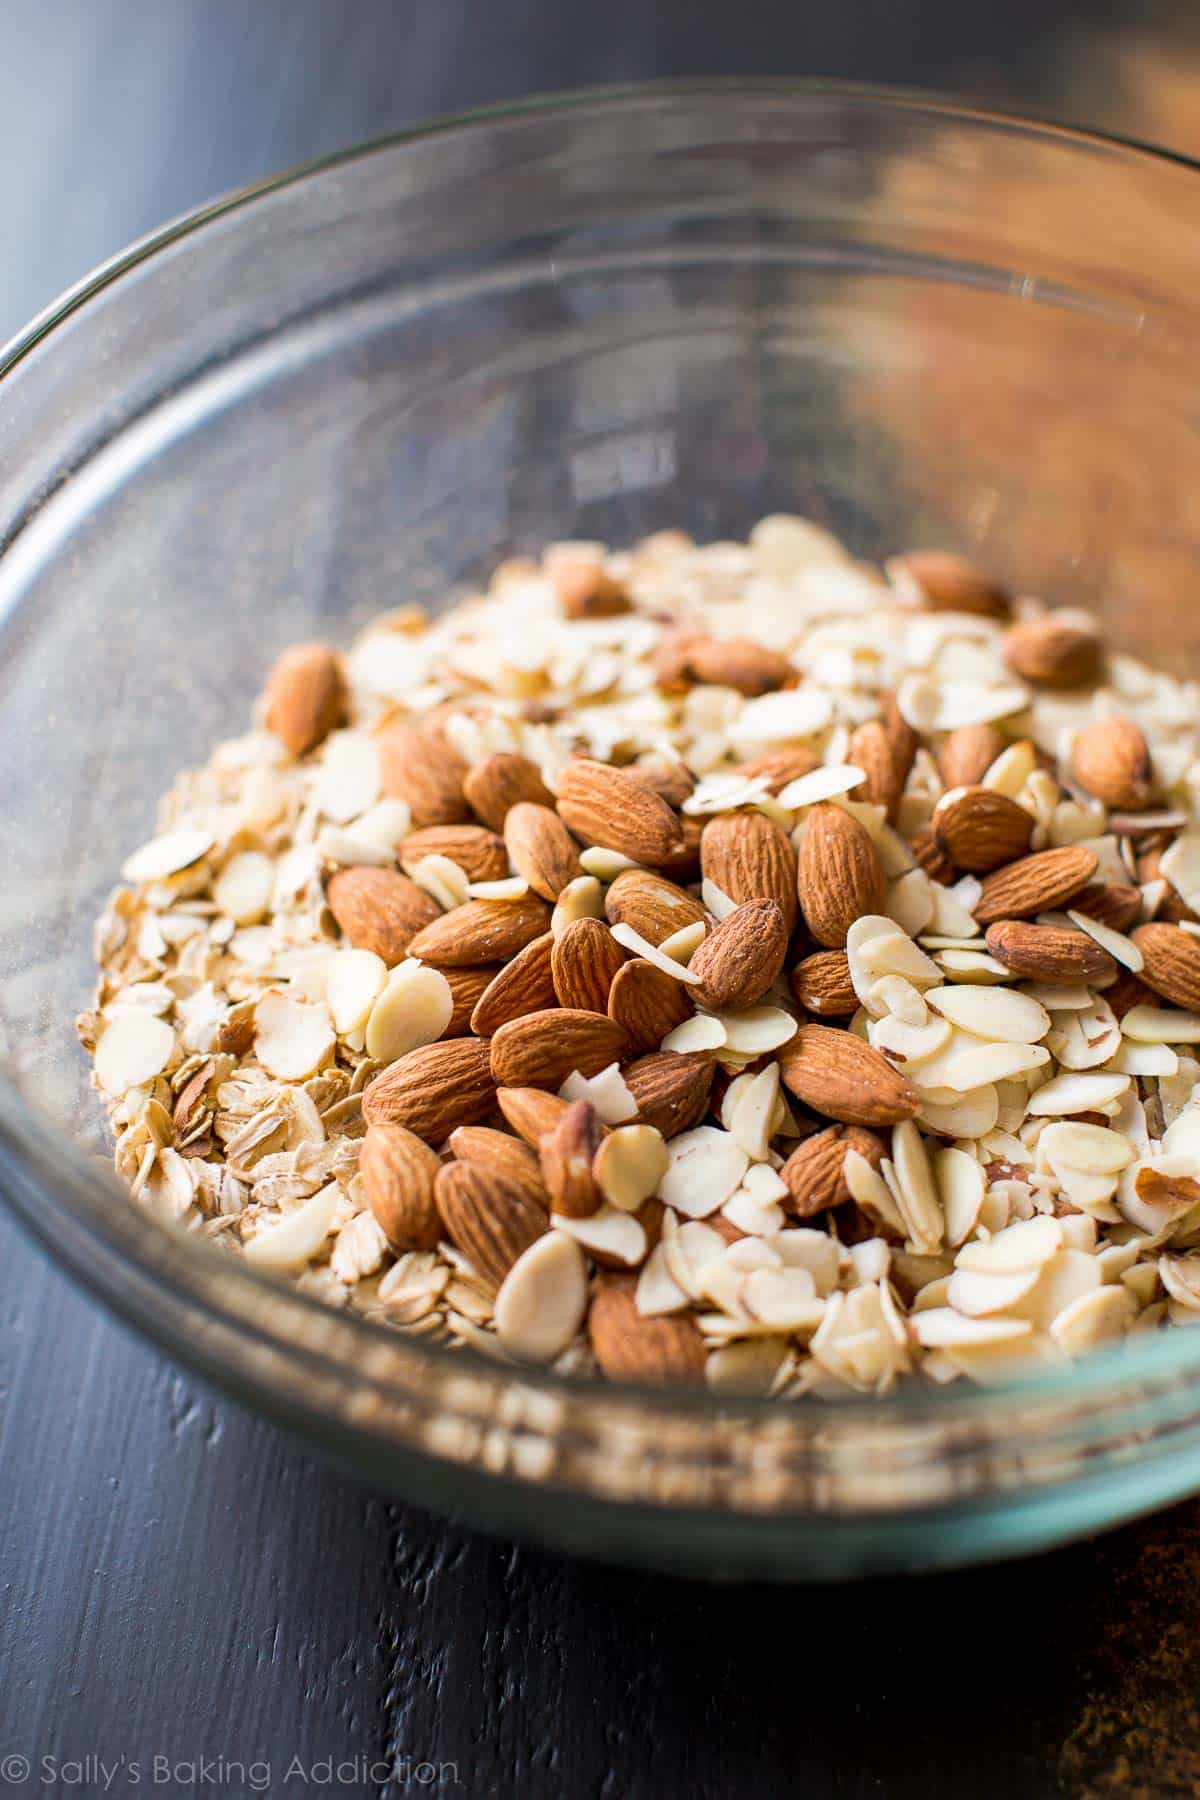 dry ingredients including oats and almonds in a glass bowl